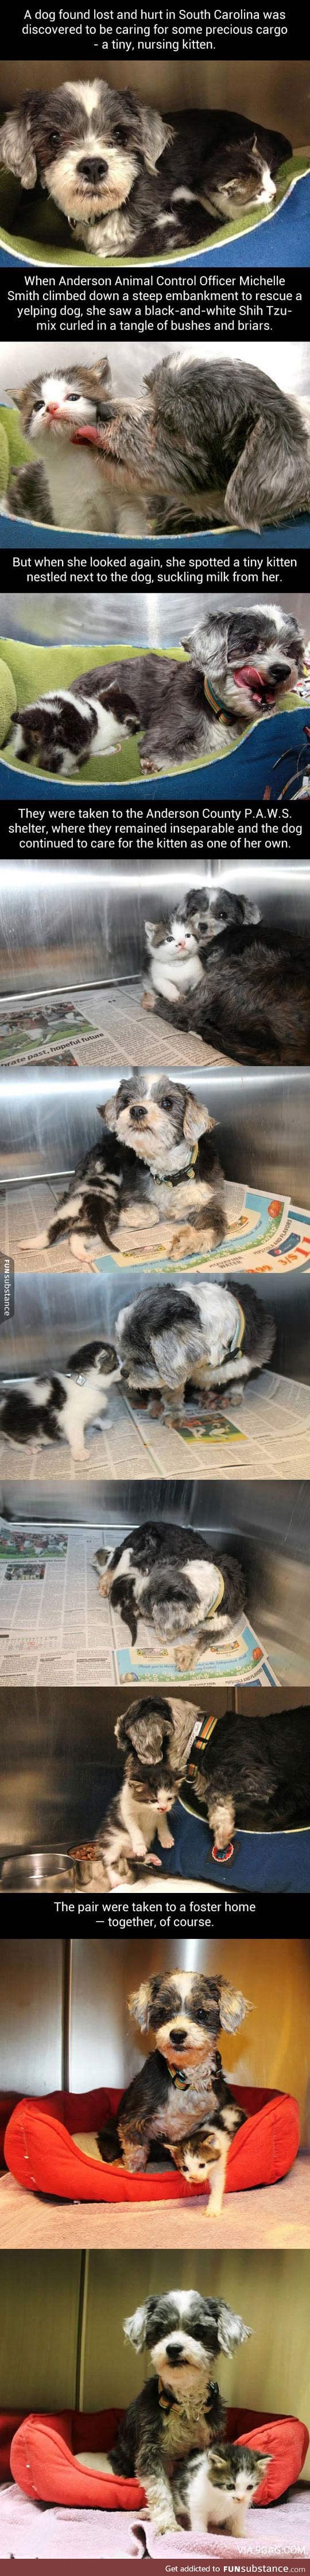 Lost dog finds kitten and saves her